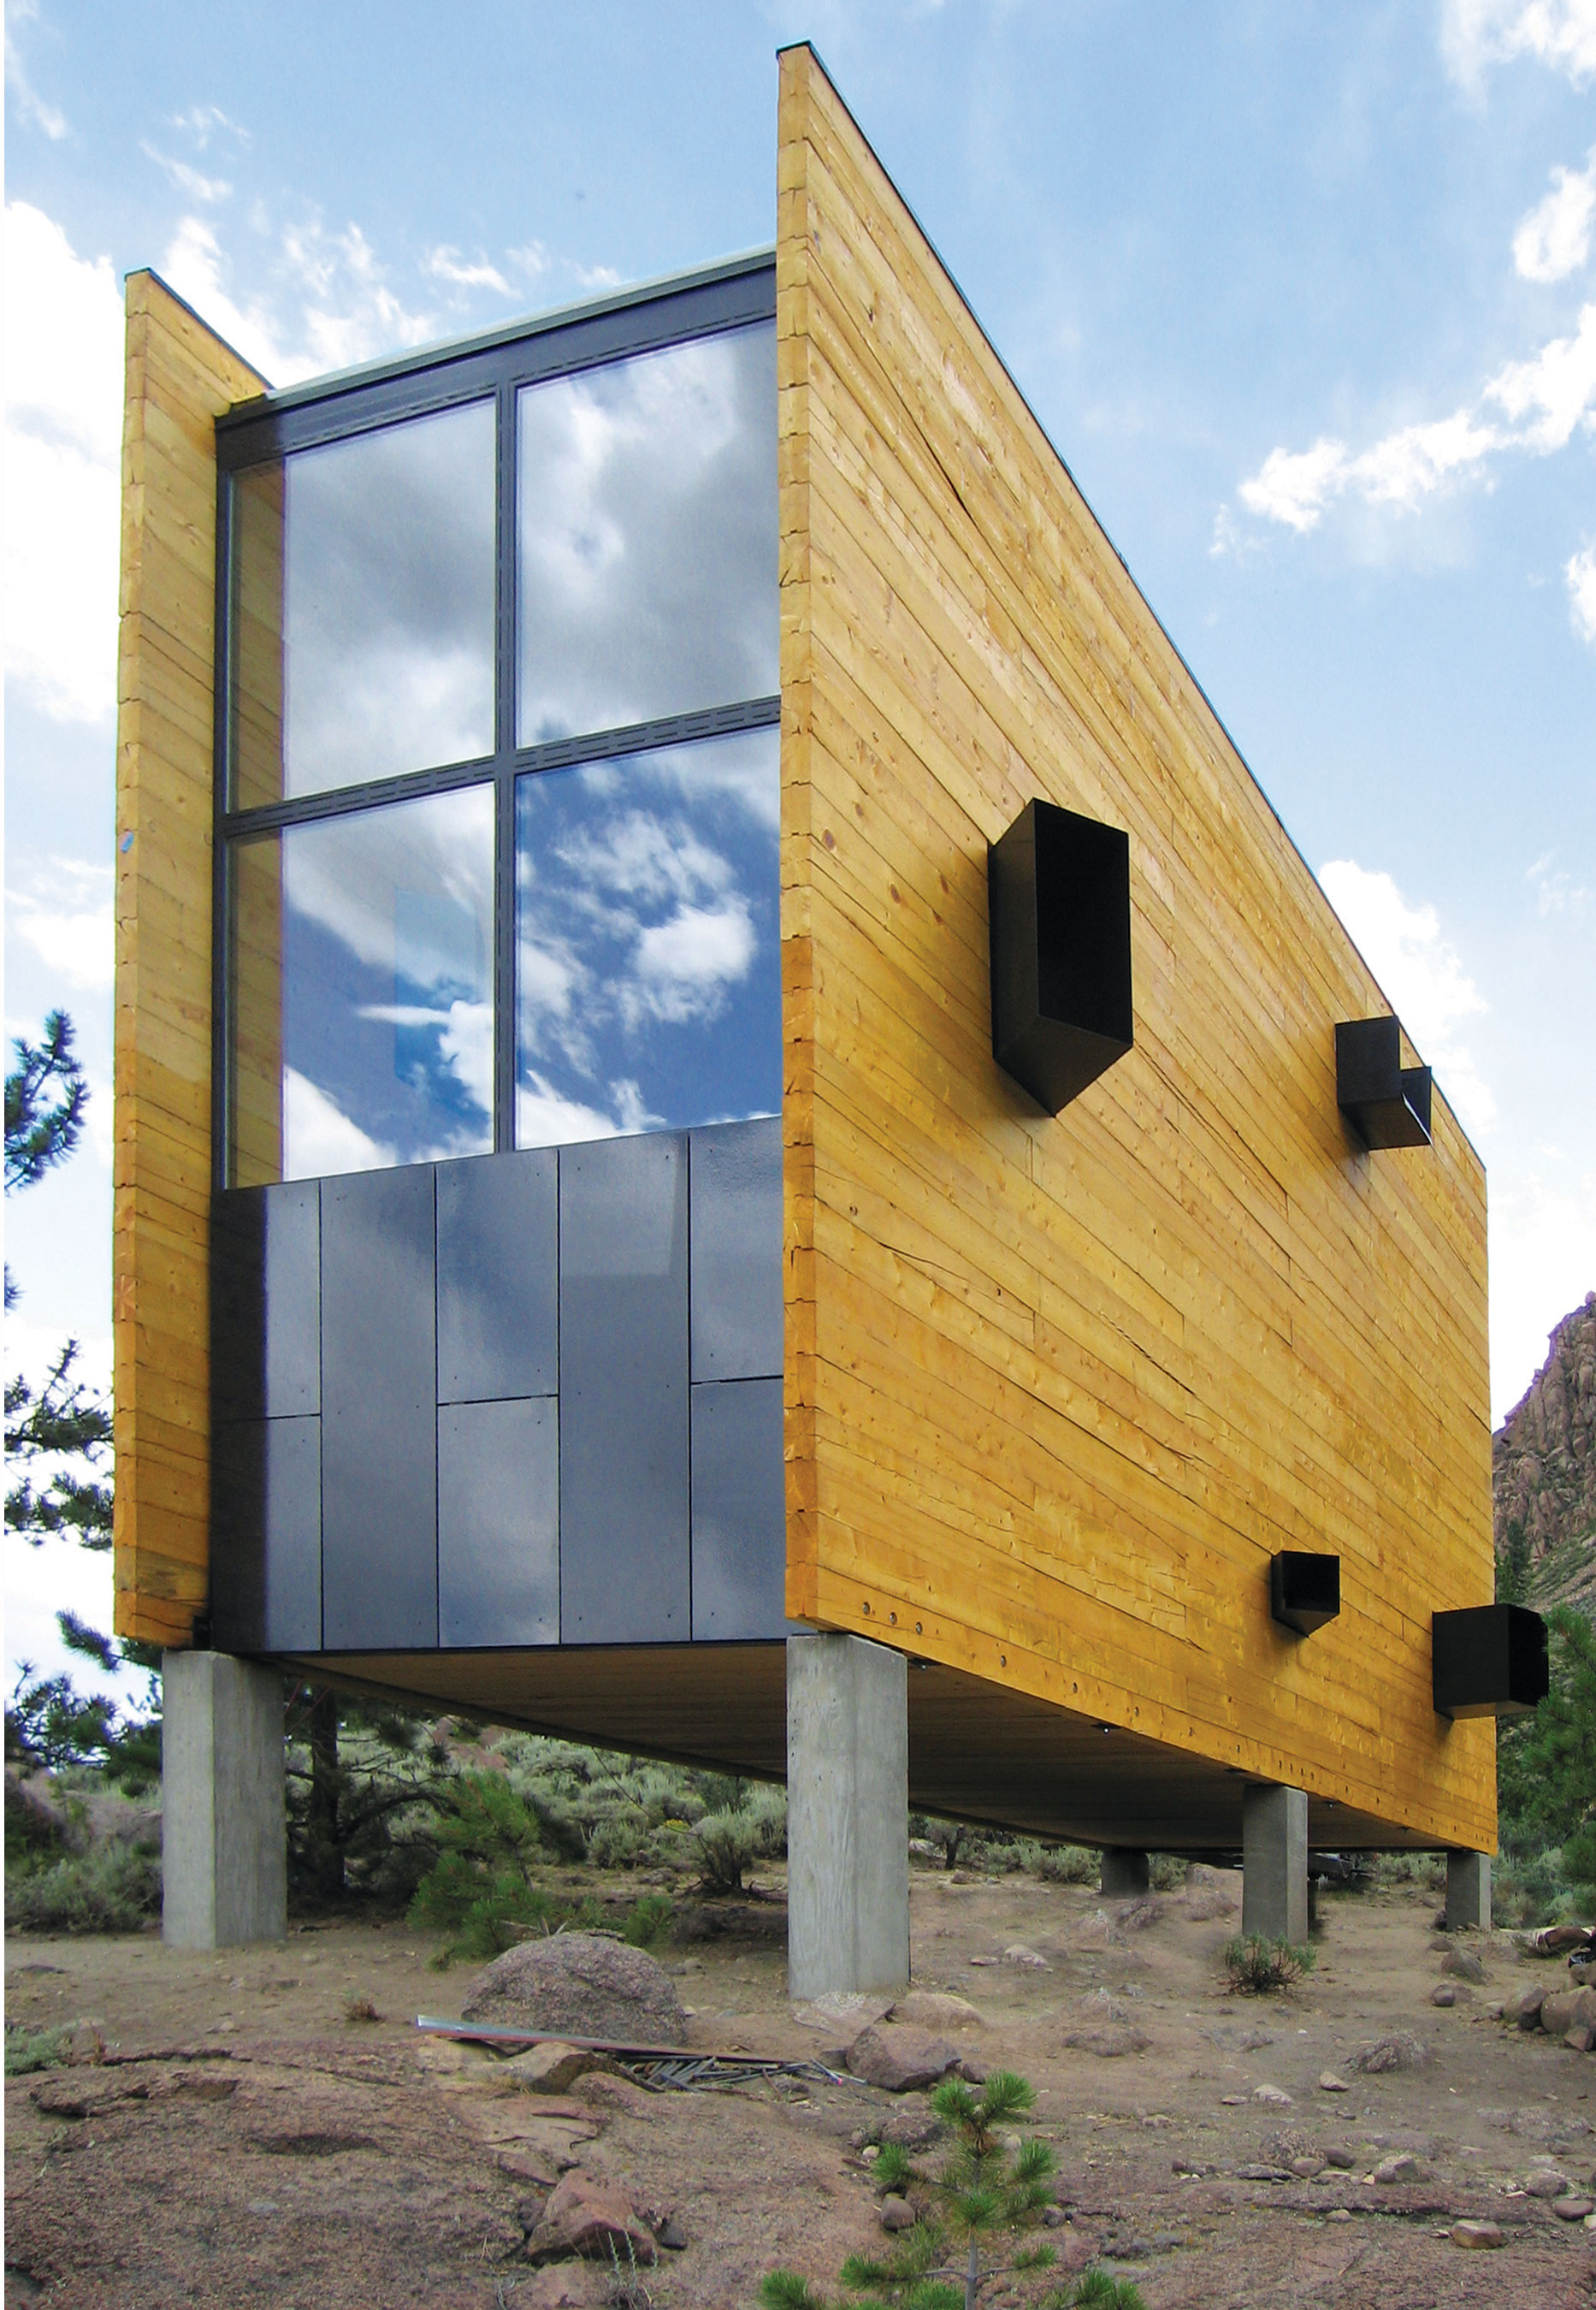 Professor Kiel Moe’s design techniques demonstrated by wooden structure built in Colorado, USA